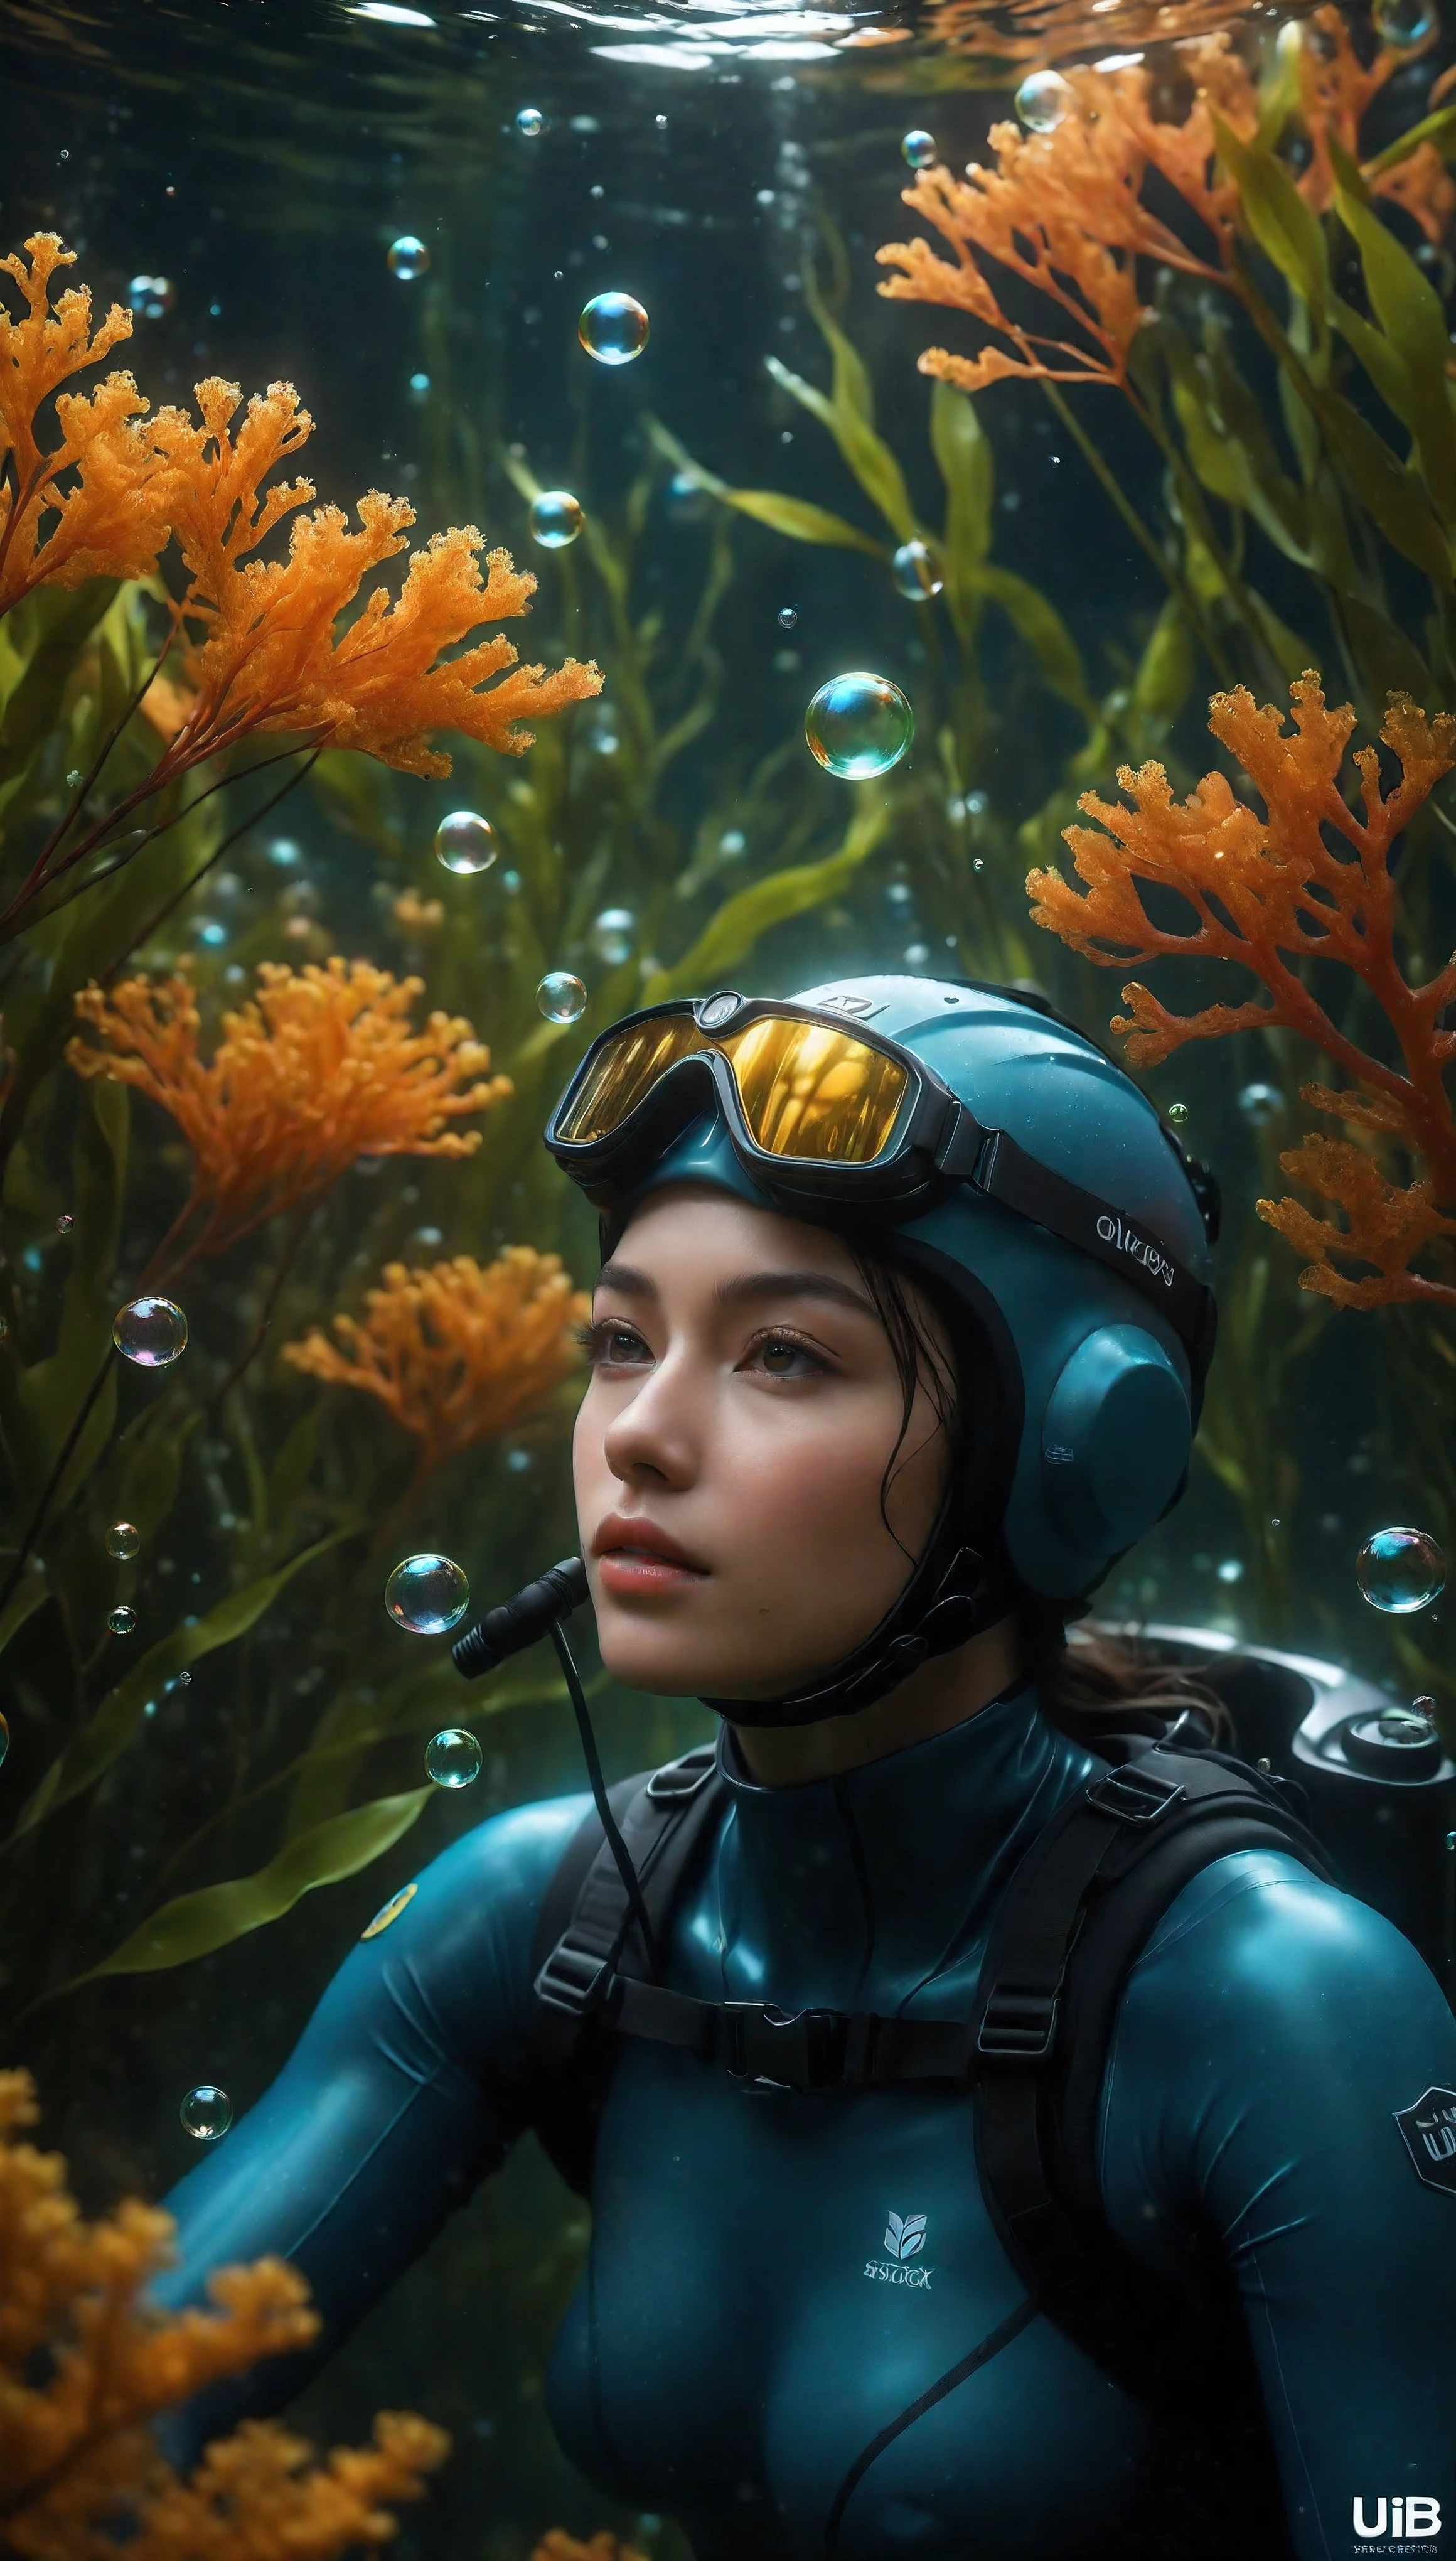 ((Masterpiece in maximum 16K resolution):1.6),((soft_color_photograpy:)1.5), ((Ultra-Detailed):1.4),((Movie-like still images and dynamic angles):1.3). | (cinematic full body photo shot of beautiful Diver underwater), (Beautiful Diver),  (tyndall effect), (a lot of bubbles), (coral), (mangroves), (neptune grass), (shimmer), (visual experience), (Realism), (Realistic),award-winning graphics, dark shot, film grain, extremely detailed, Digital Art, rtx, Unreal Engine, scene concept anti glare effect, All captured with sharp focus. | Rendered in ultra-high definition with UHD and retina quality, this masterpiece ensures anatomical correctness and textured skin with super detail. With a focus on high quality and accuracy, this award-winning portrayal captures every nuance in stunning 16k resolution, immersing viewers in its lifelike depiction. | ((perfect_composition, perfect_design, perfect_layout, perfect_detail, ultra_detailed)), ((enhance_all, fix_everything)), More Detail, Enhance.